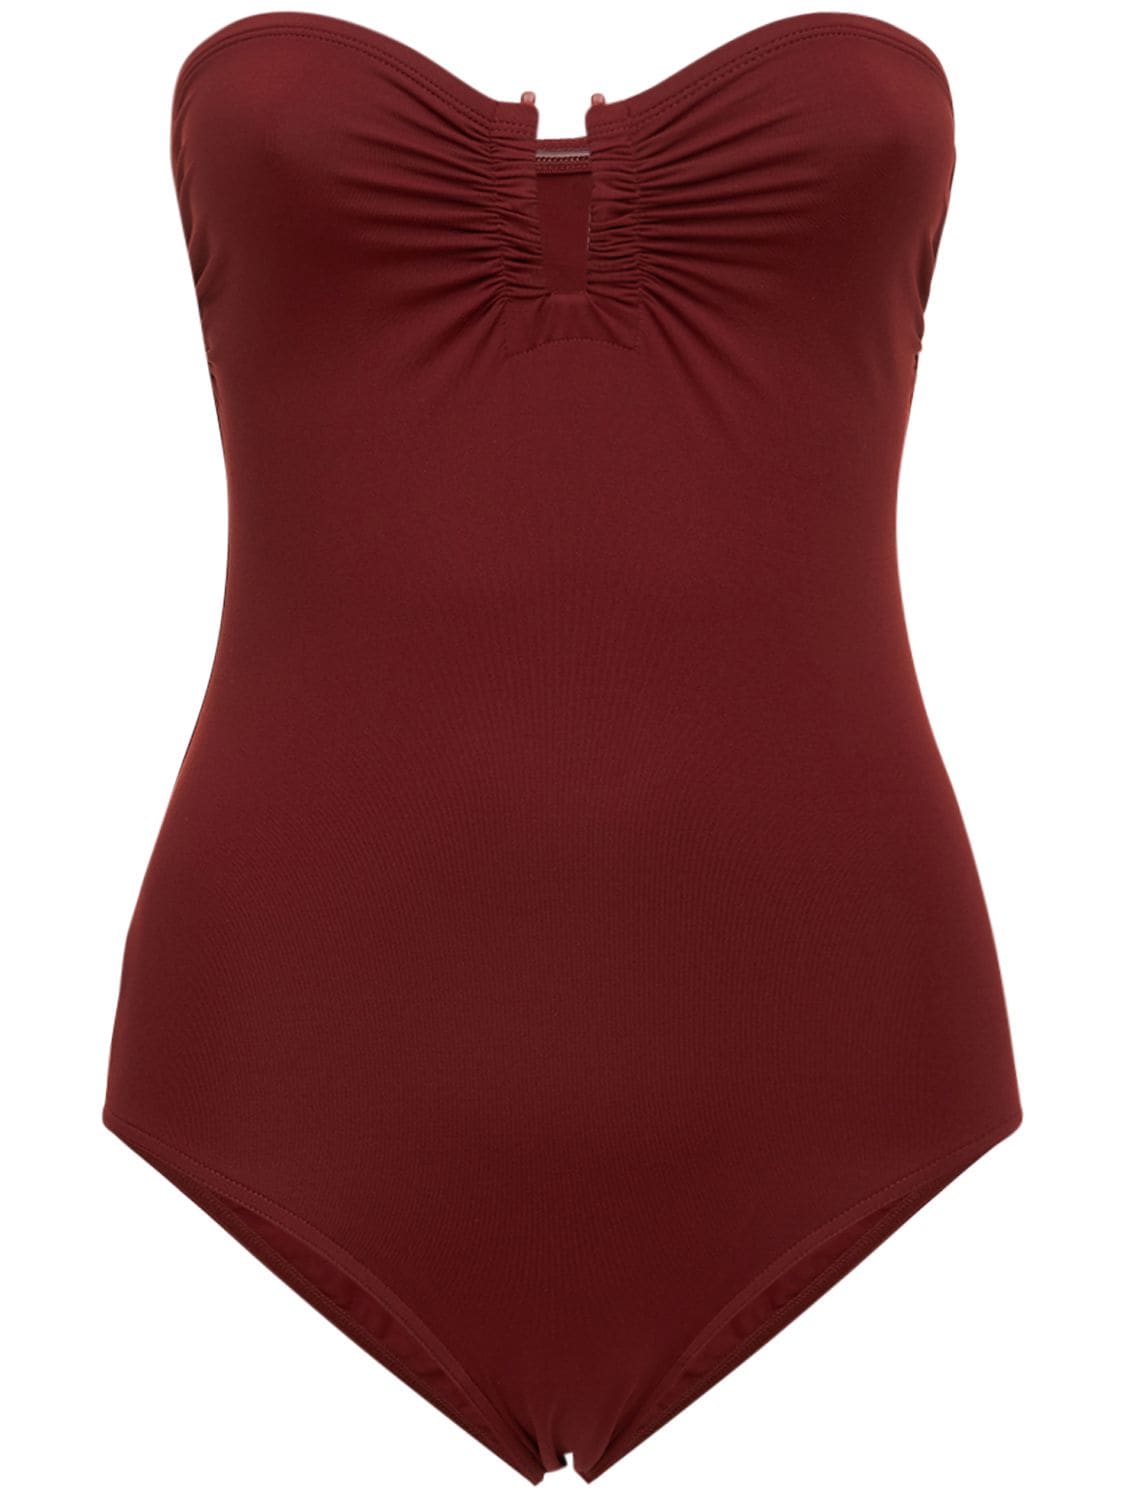 Cassiopee Strapless One Piece Swimsuit